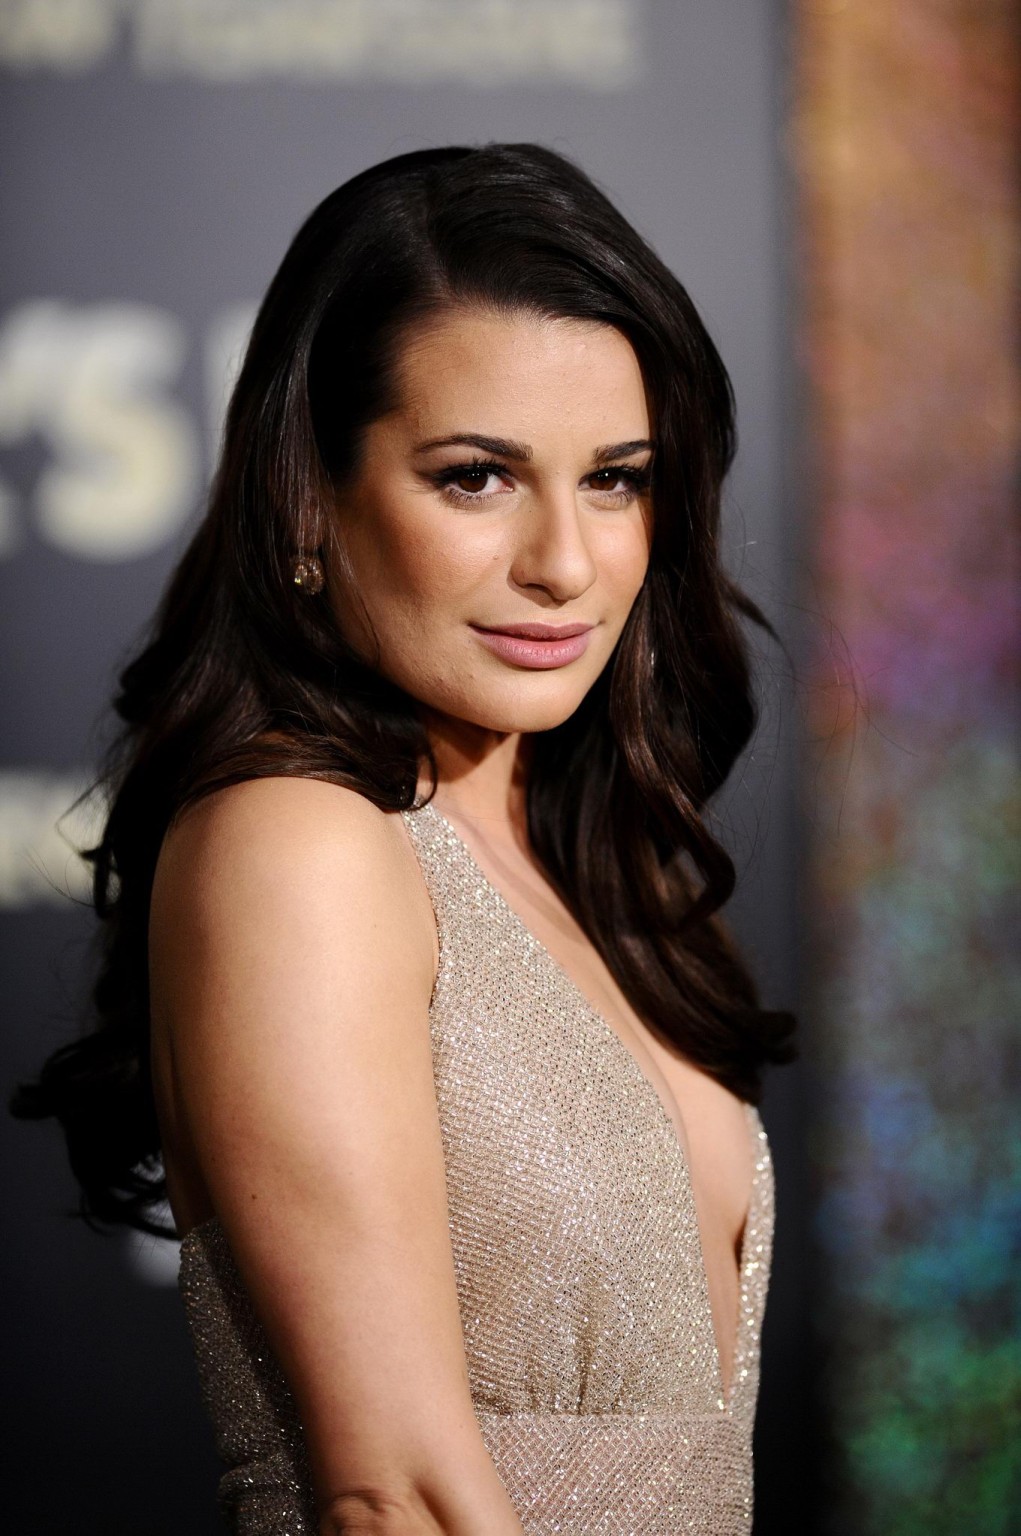 Lea Michele braless showing side boob at the 'New Year's Eve' premiere in LA #75279875